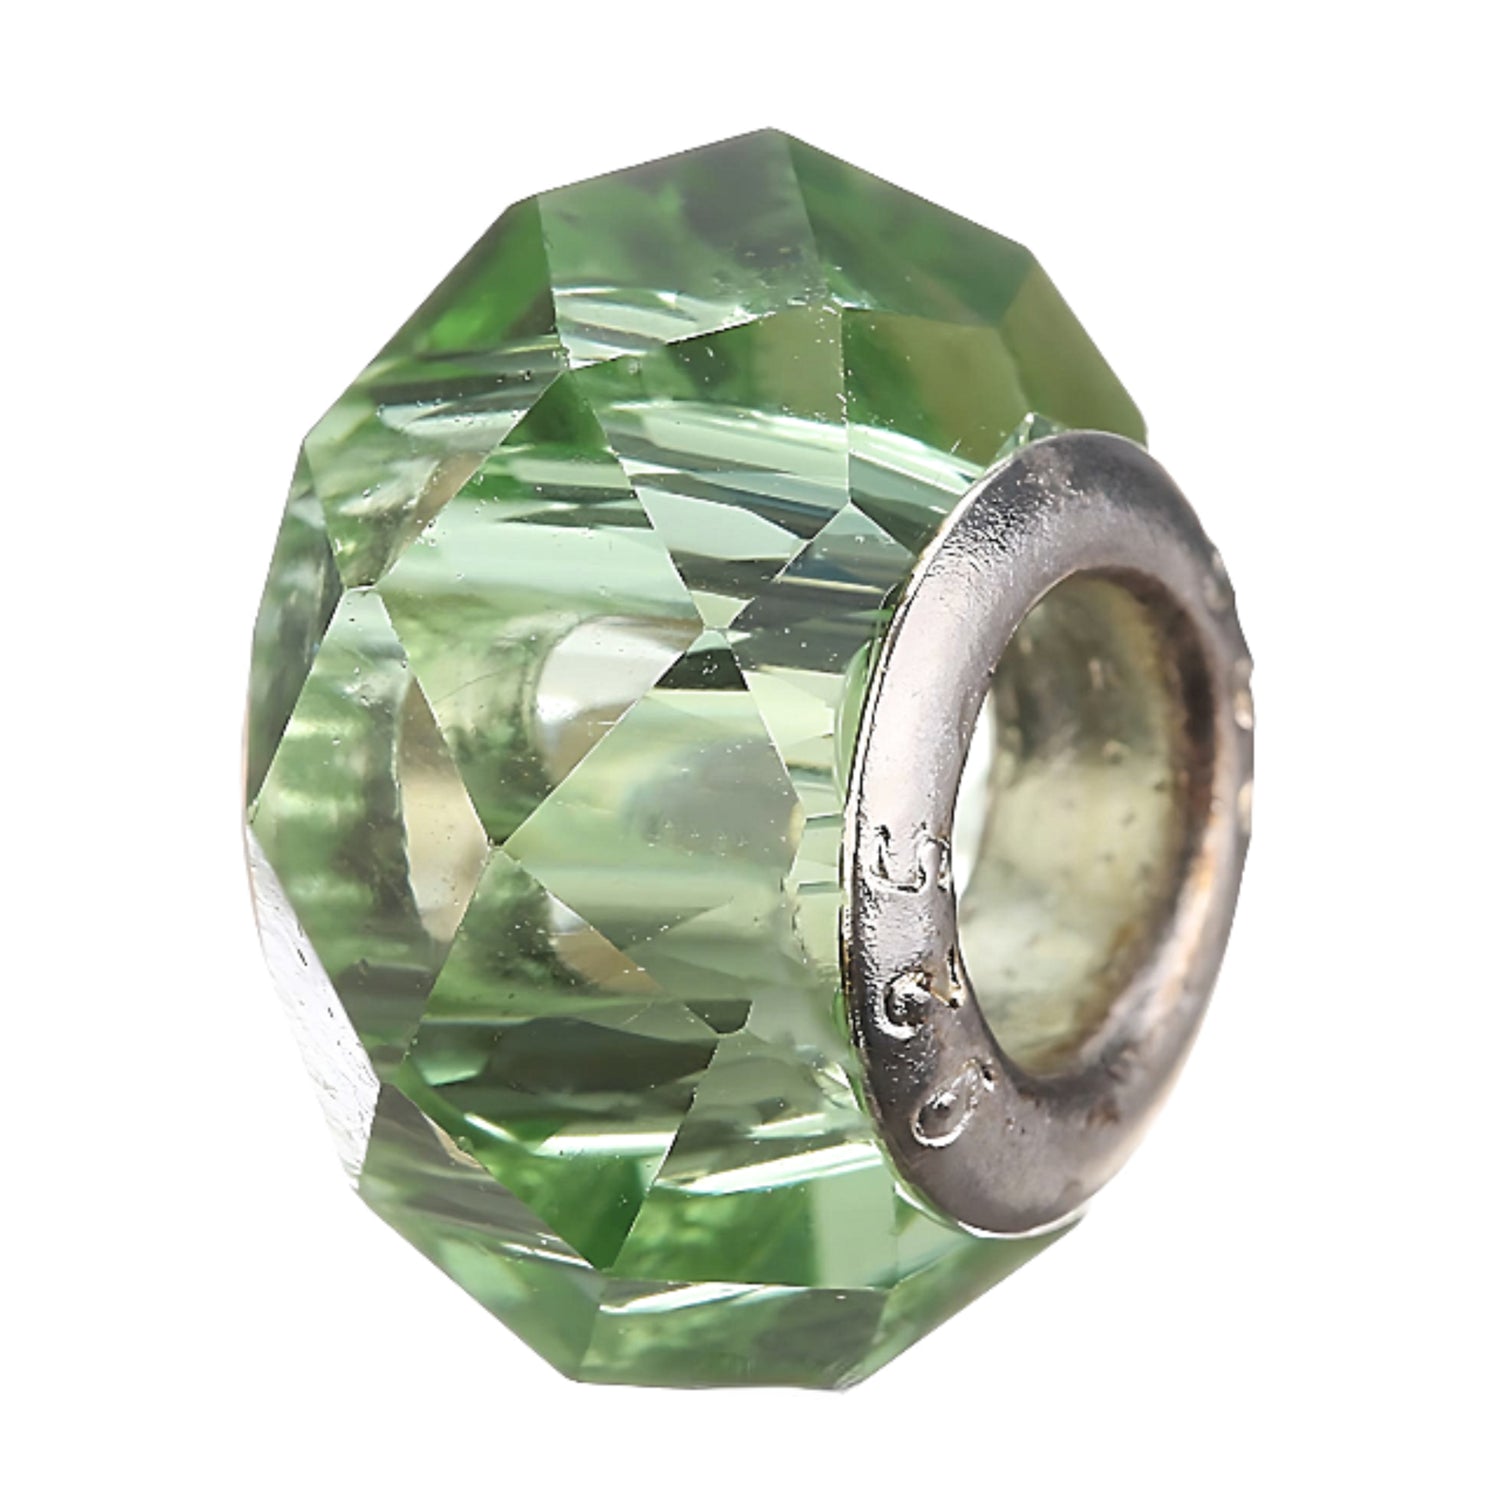 a faceted glass bead in light green color